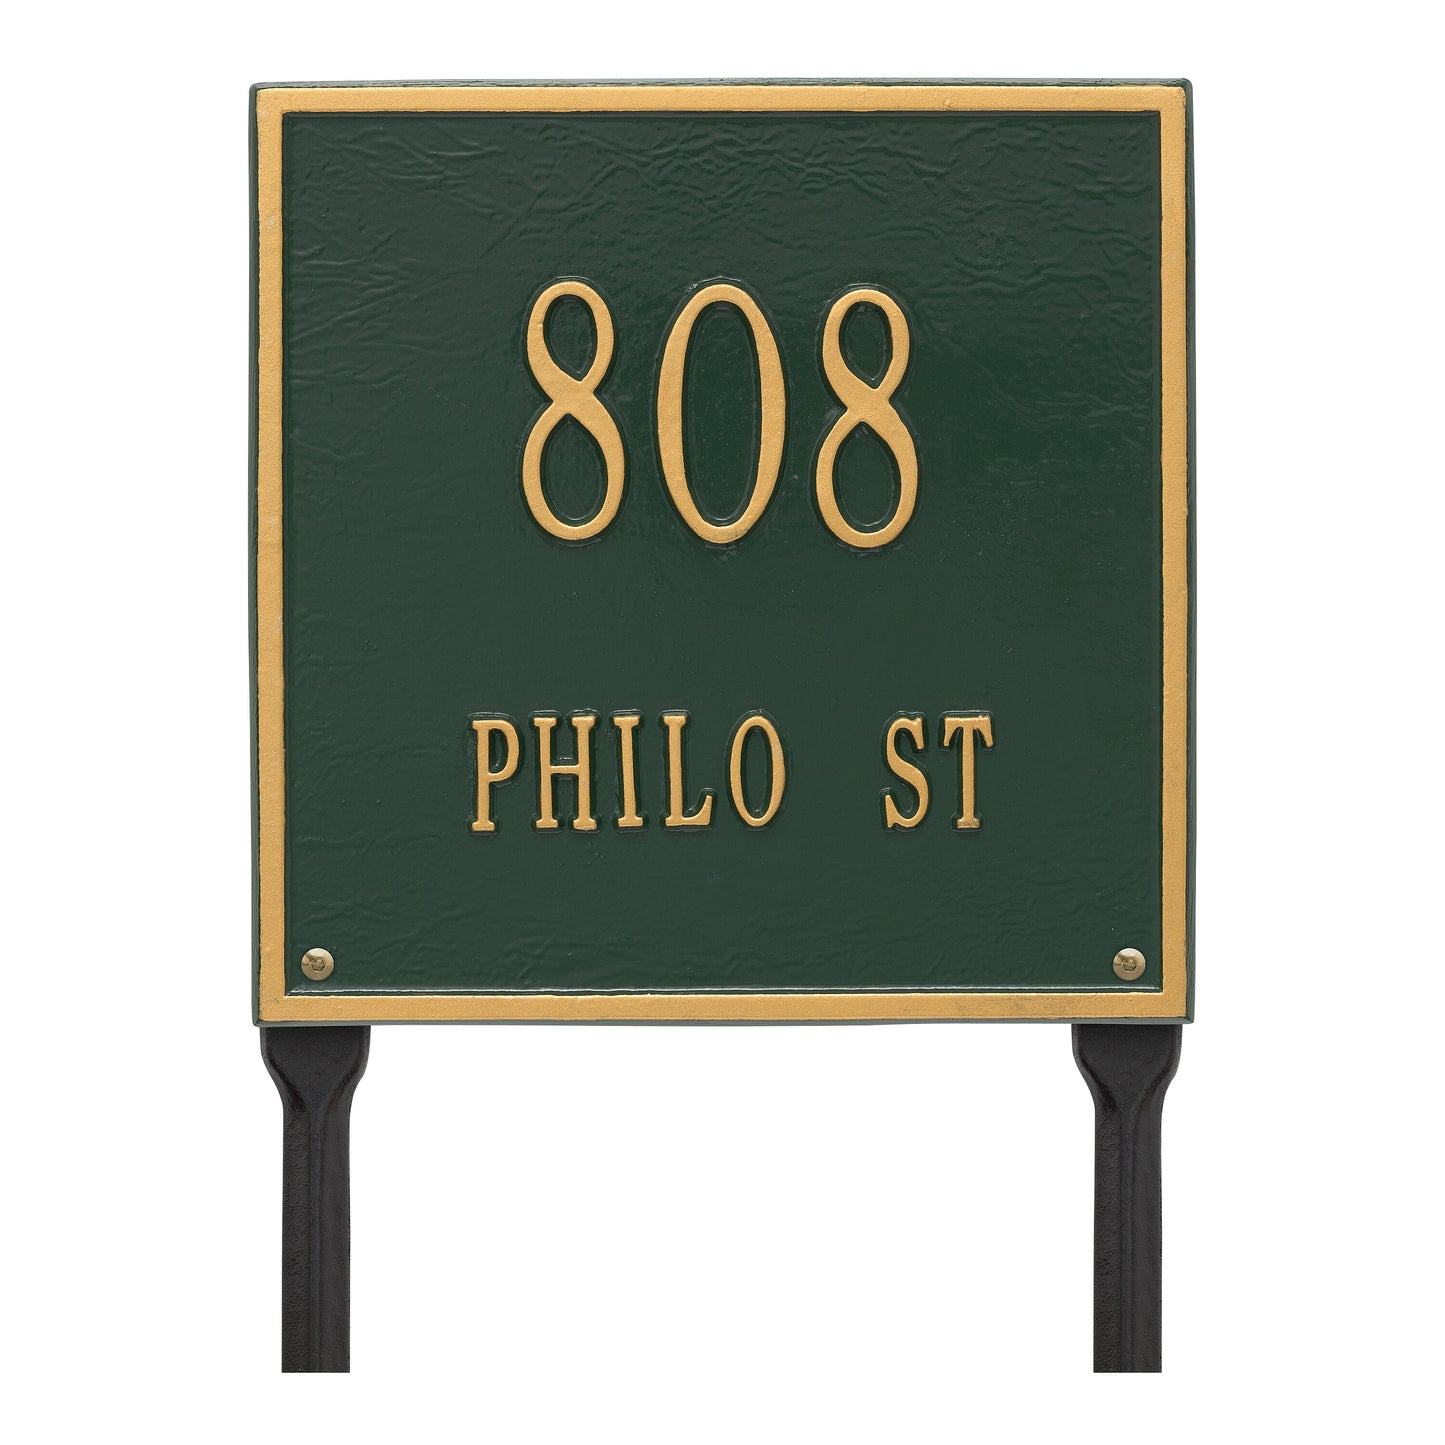 Whitehall Products Personalized Square Standard Lawn Plaque Two Line Oil Rubbed Bronze